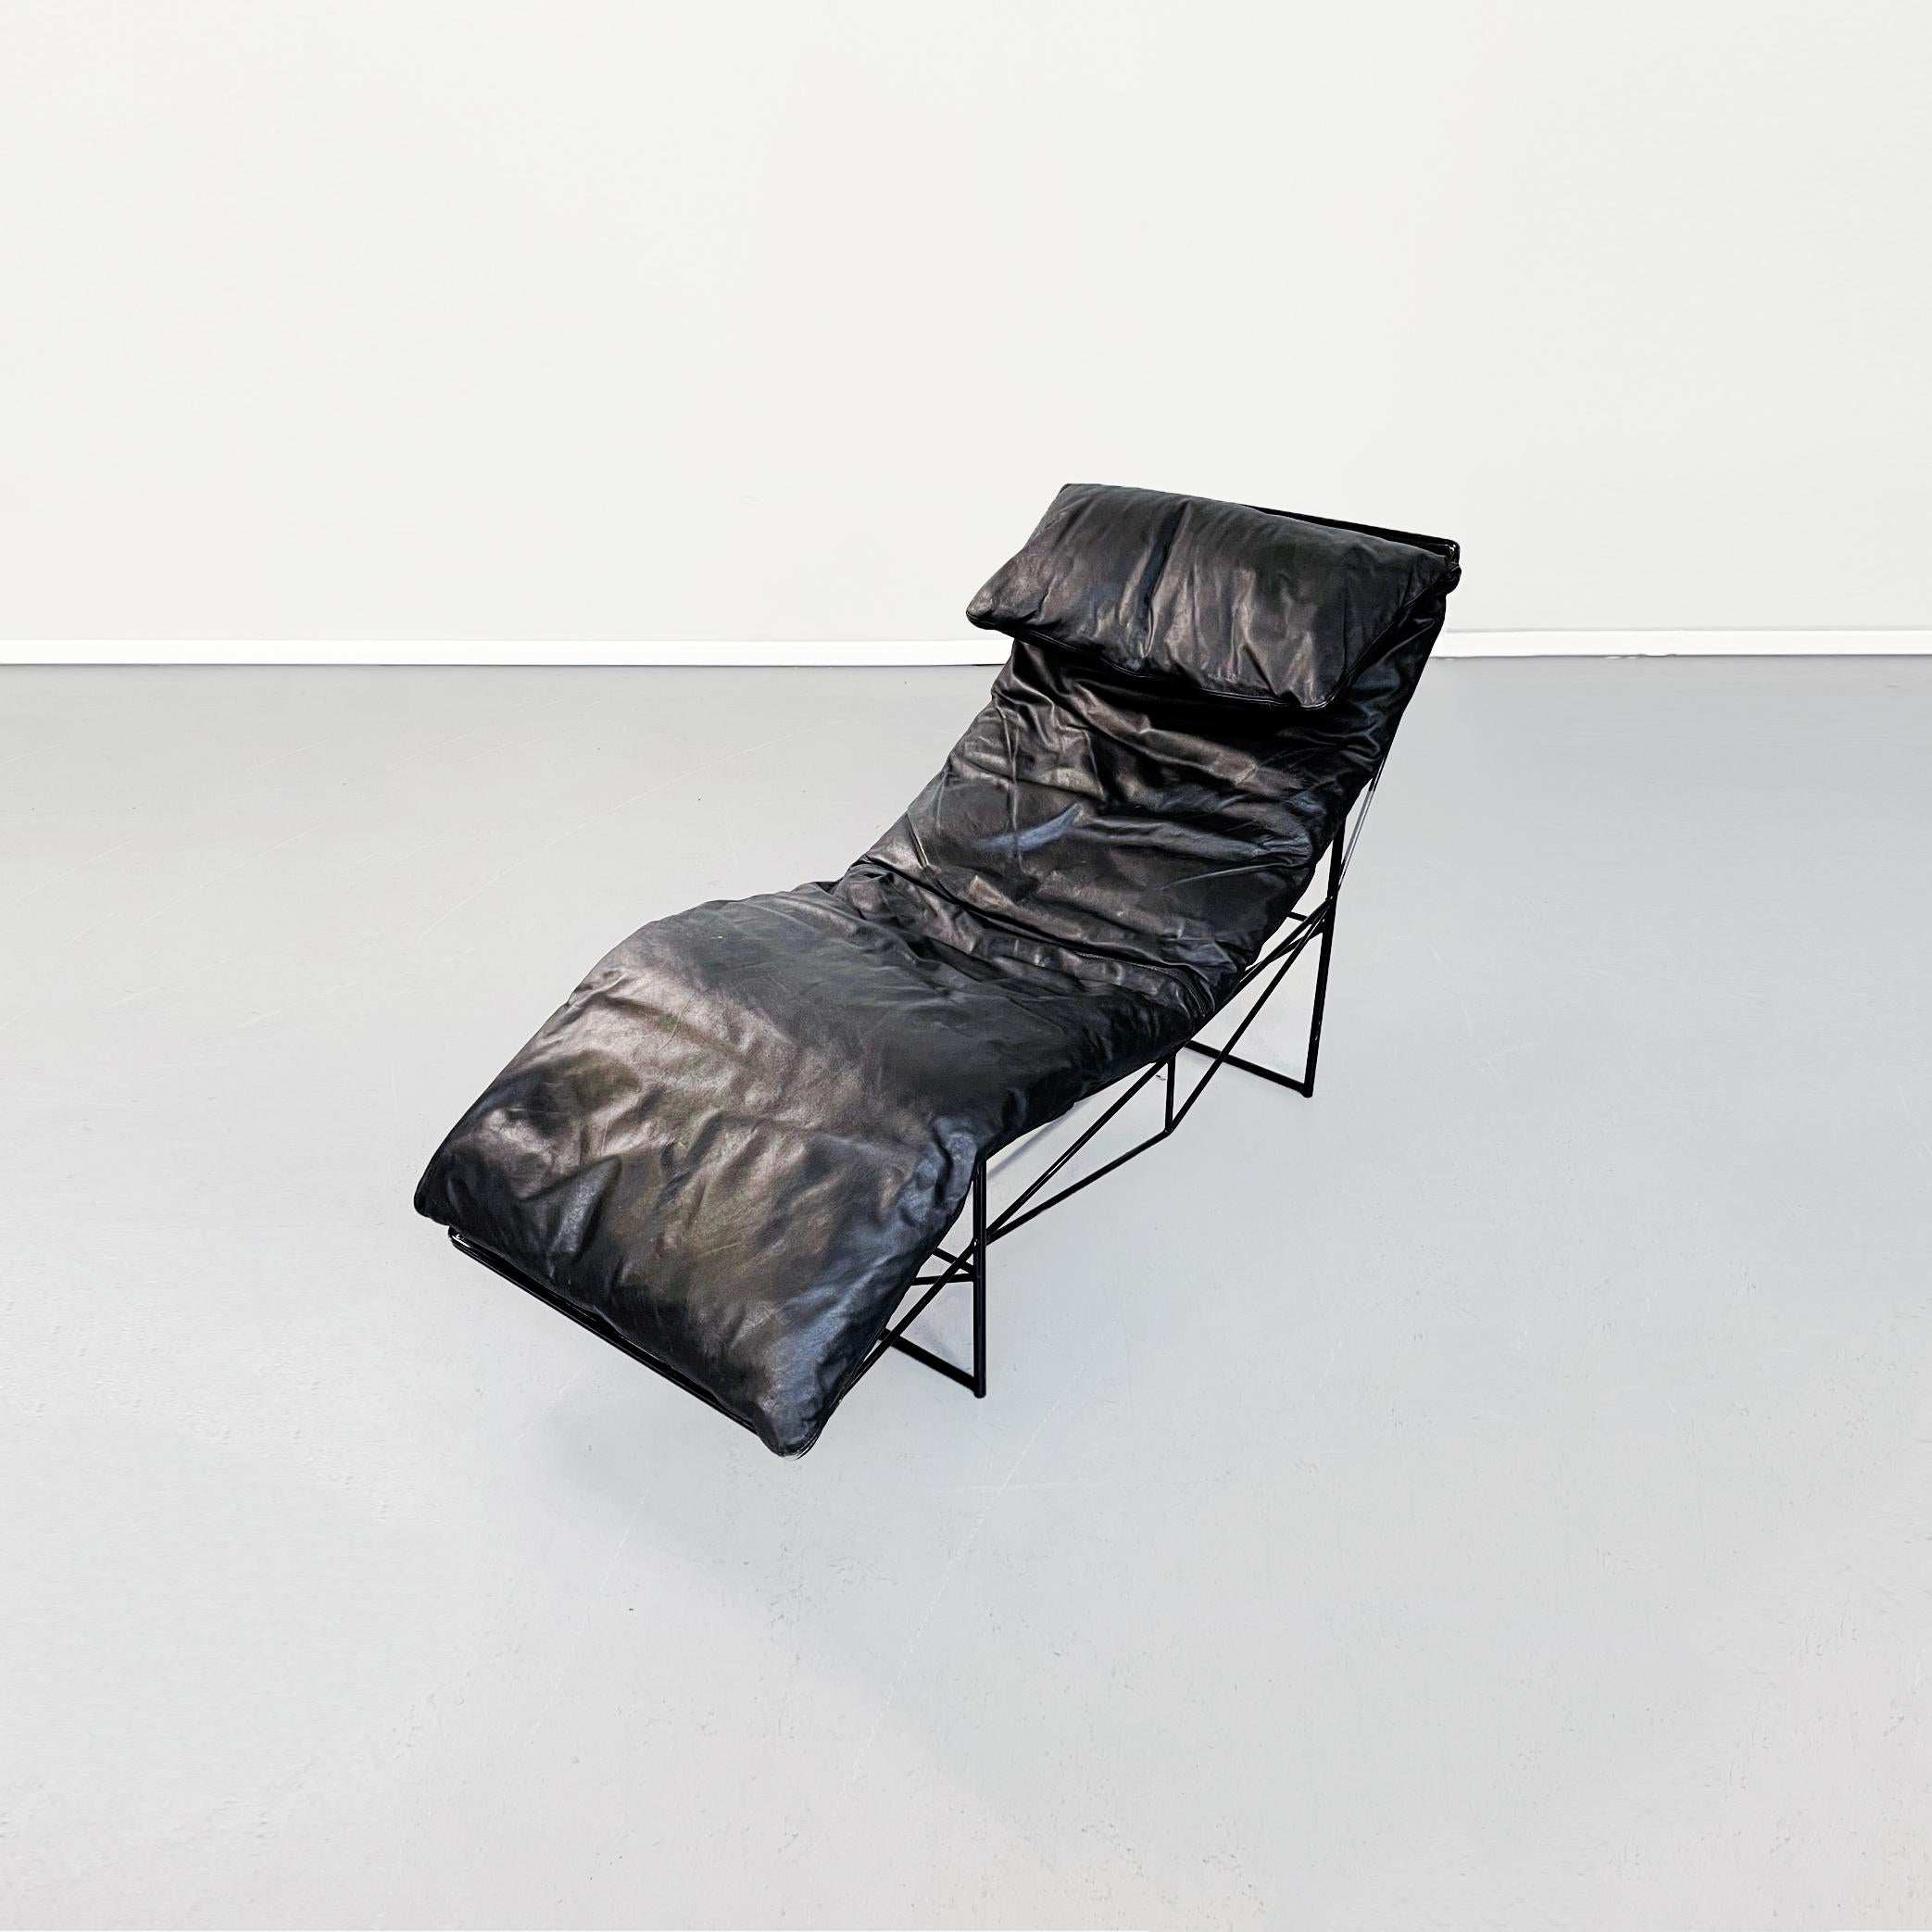 Italian mid-century chaise lounge by Paolo Passerini for Uvet Dimensione, 1980s
Chaise lounge in black leather with feather padding and black painted iron rod frame.
Produced by Uvet Dimensione in 1980s and designed by Paolo Passerin.
Very good